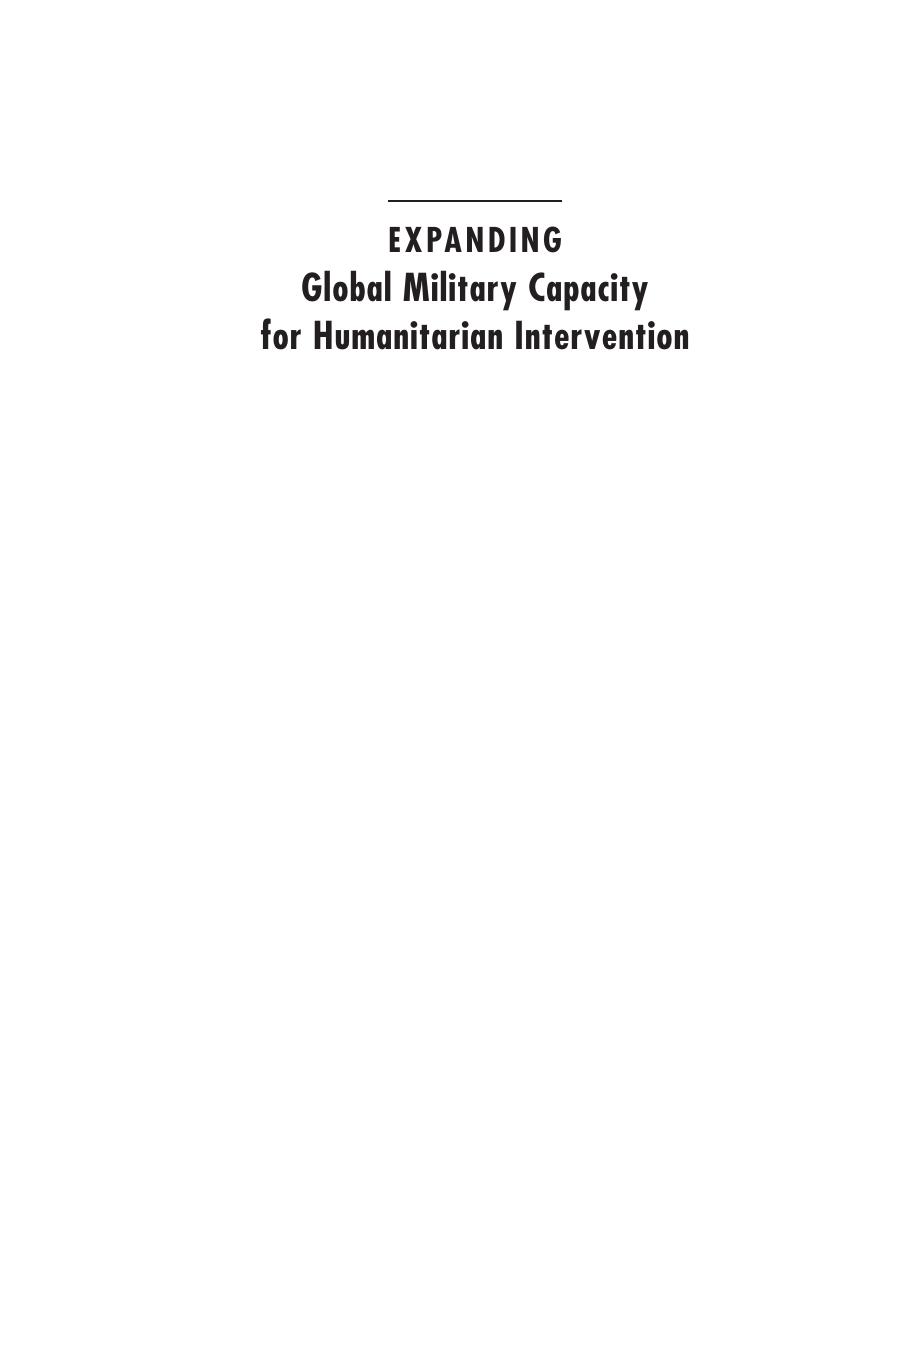 Expanding Global Military Capacity for Humanitarian Intervention by Michael E. O'Hanlon